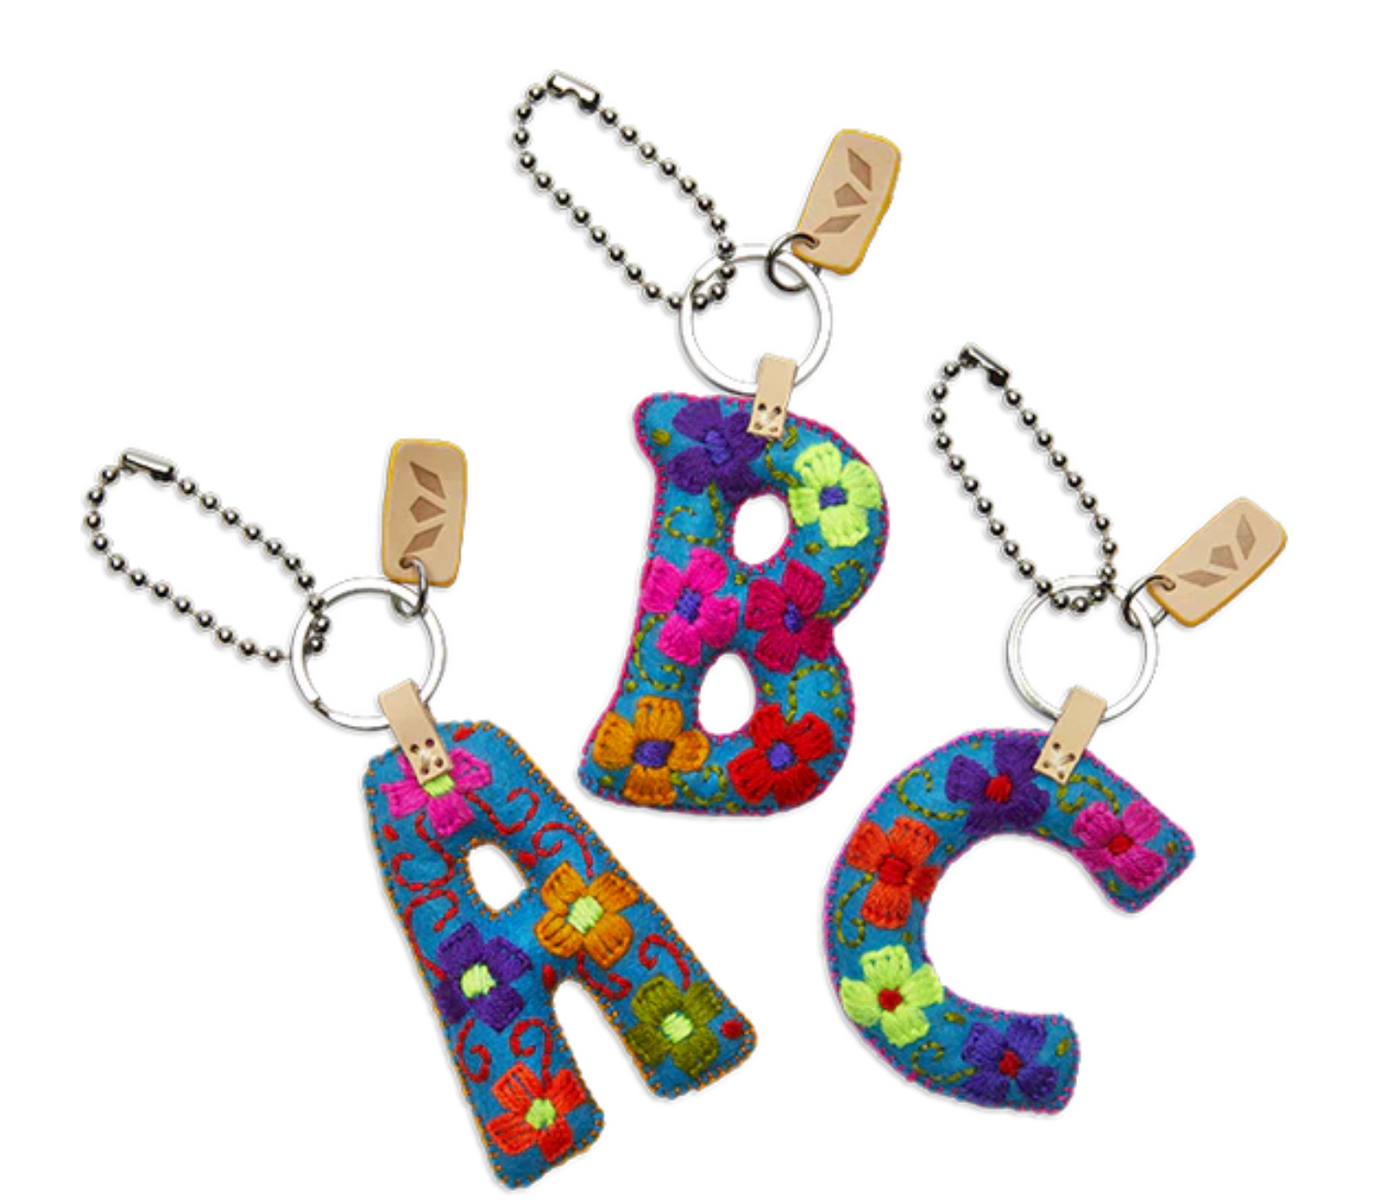 Consuela Felt Letter Charms in Turquoise